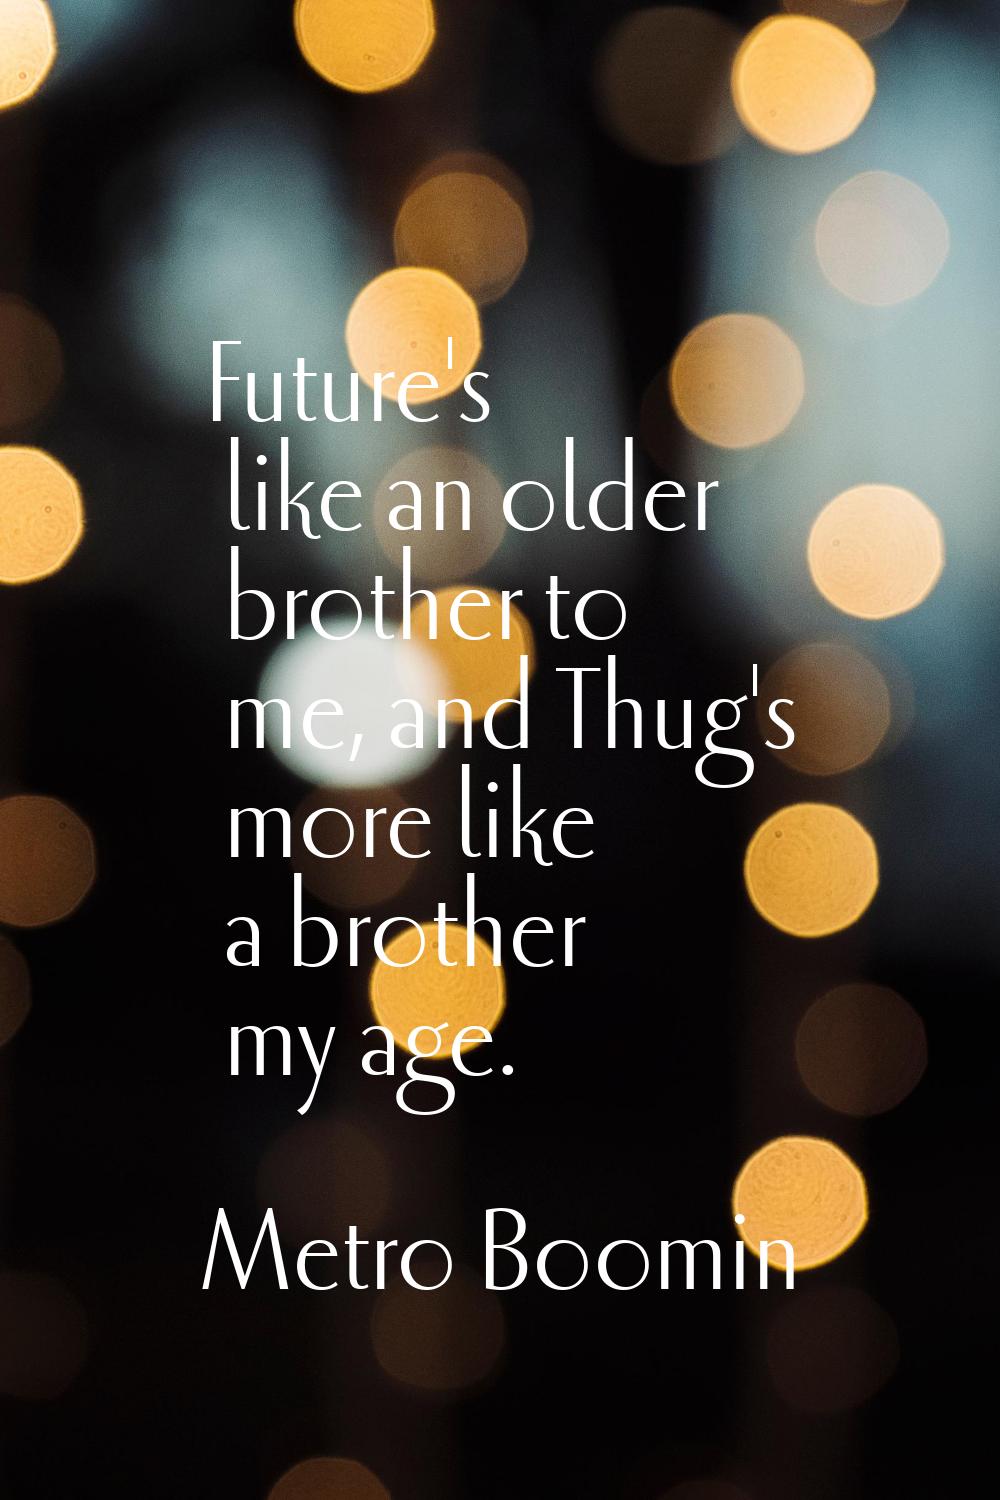 Future's like an older brother to me, and Thug's more like a brother my age.